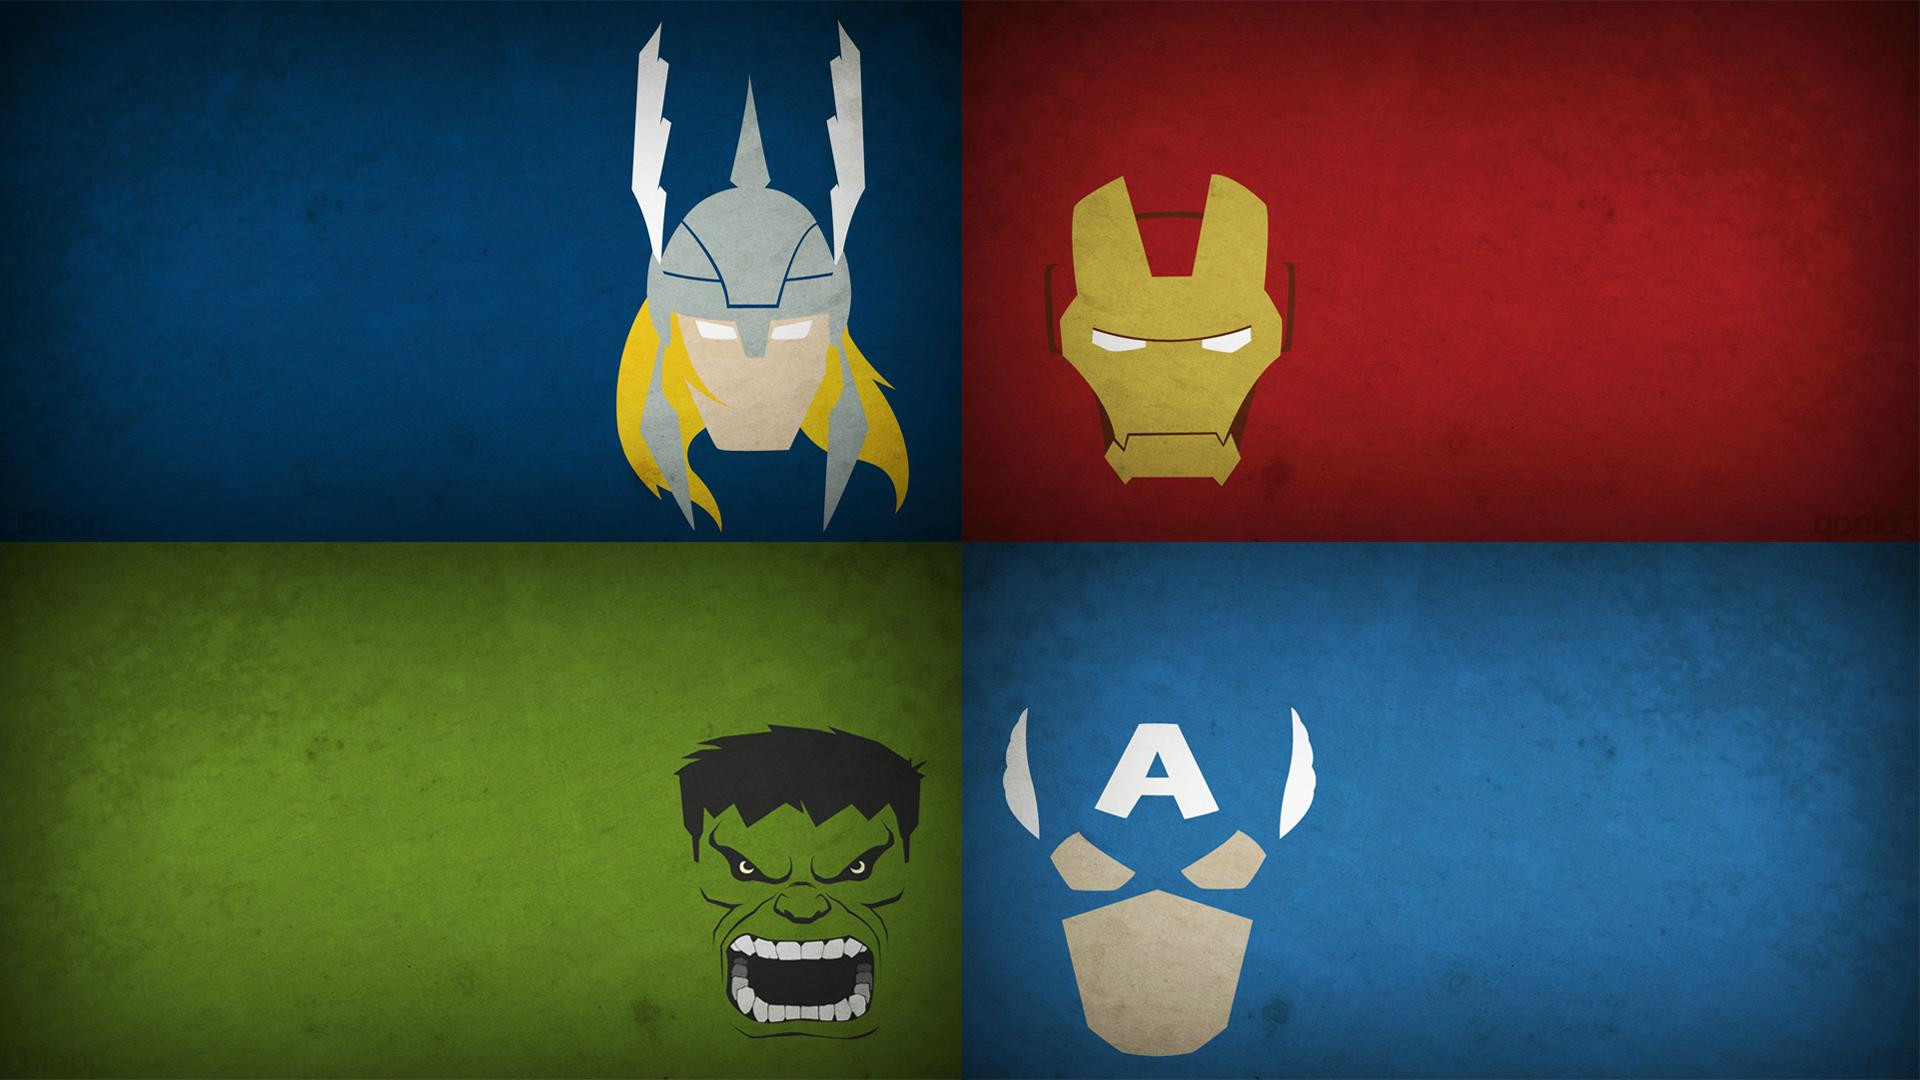 Main reason behind the popularity of the avengers wallpaper is the